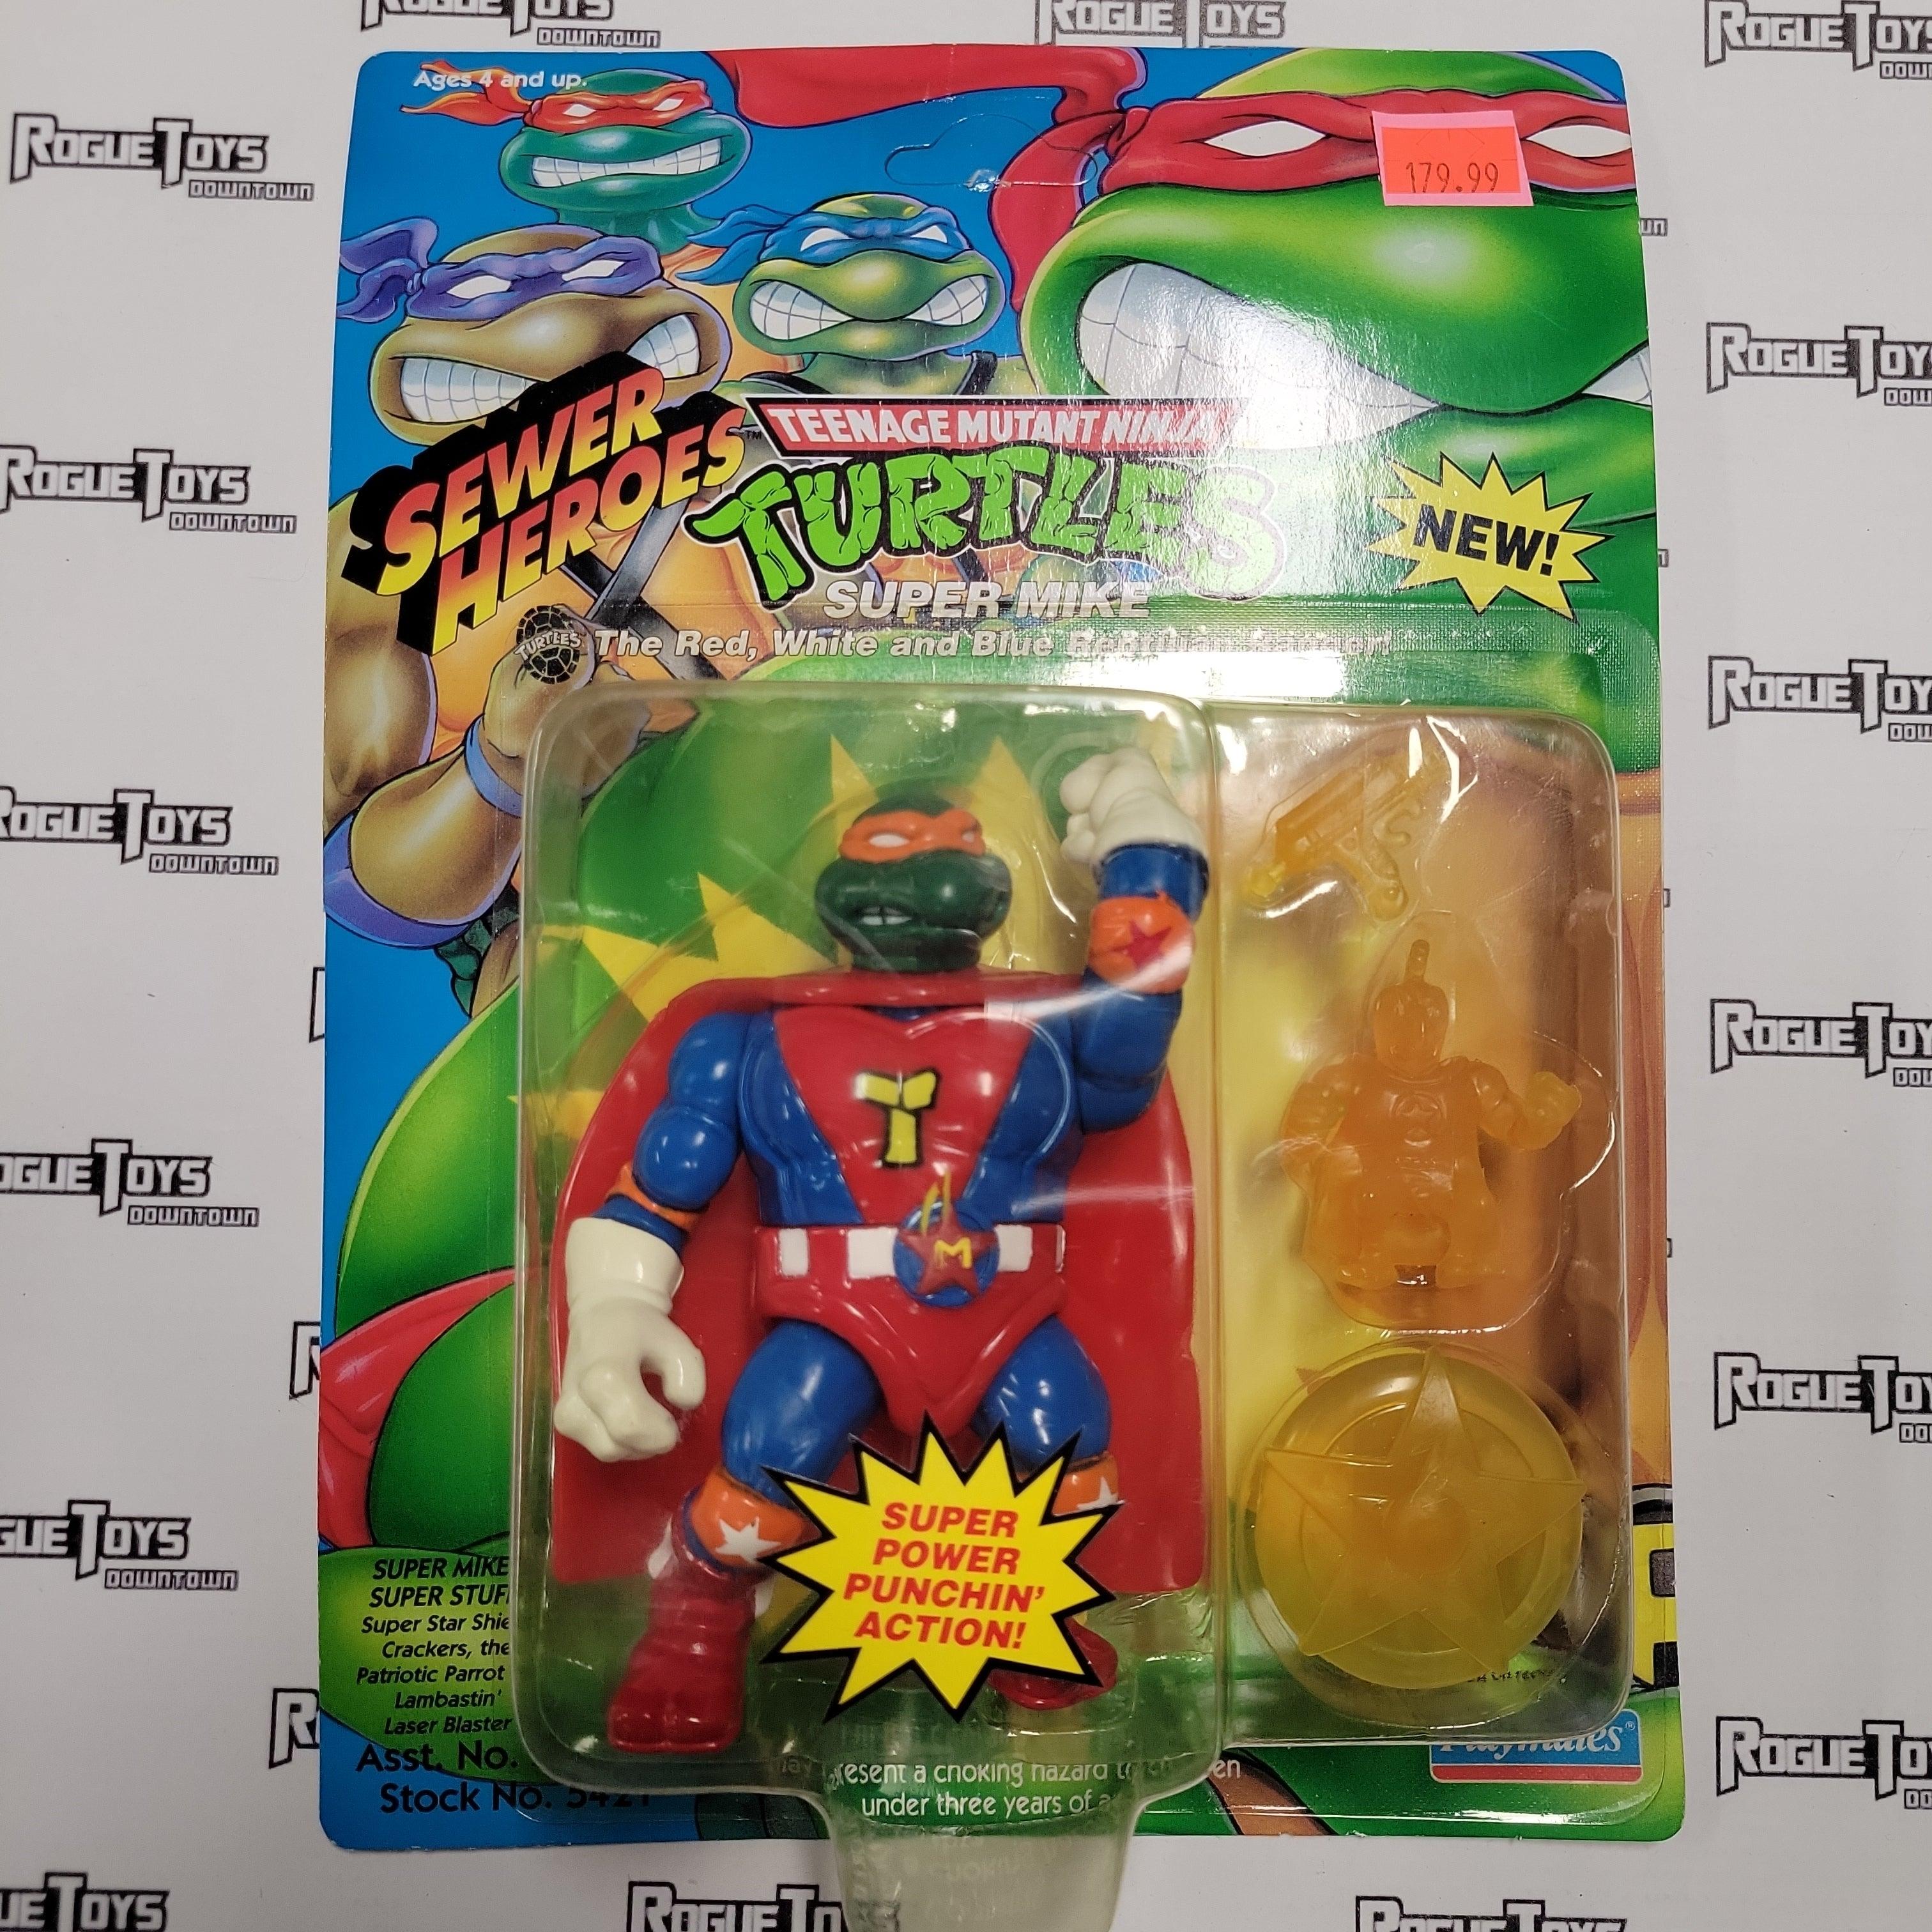 PLAYMATES Vintage TMNT, 1993, Sewer Heroes, Super Mike - Rogue Toys